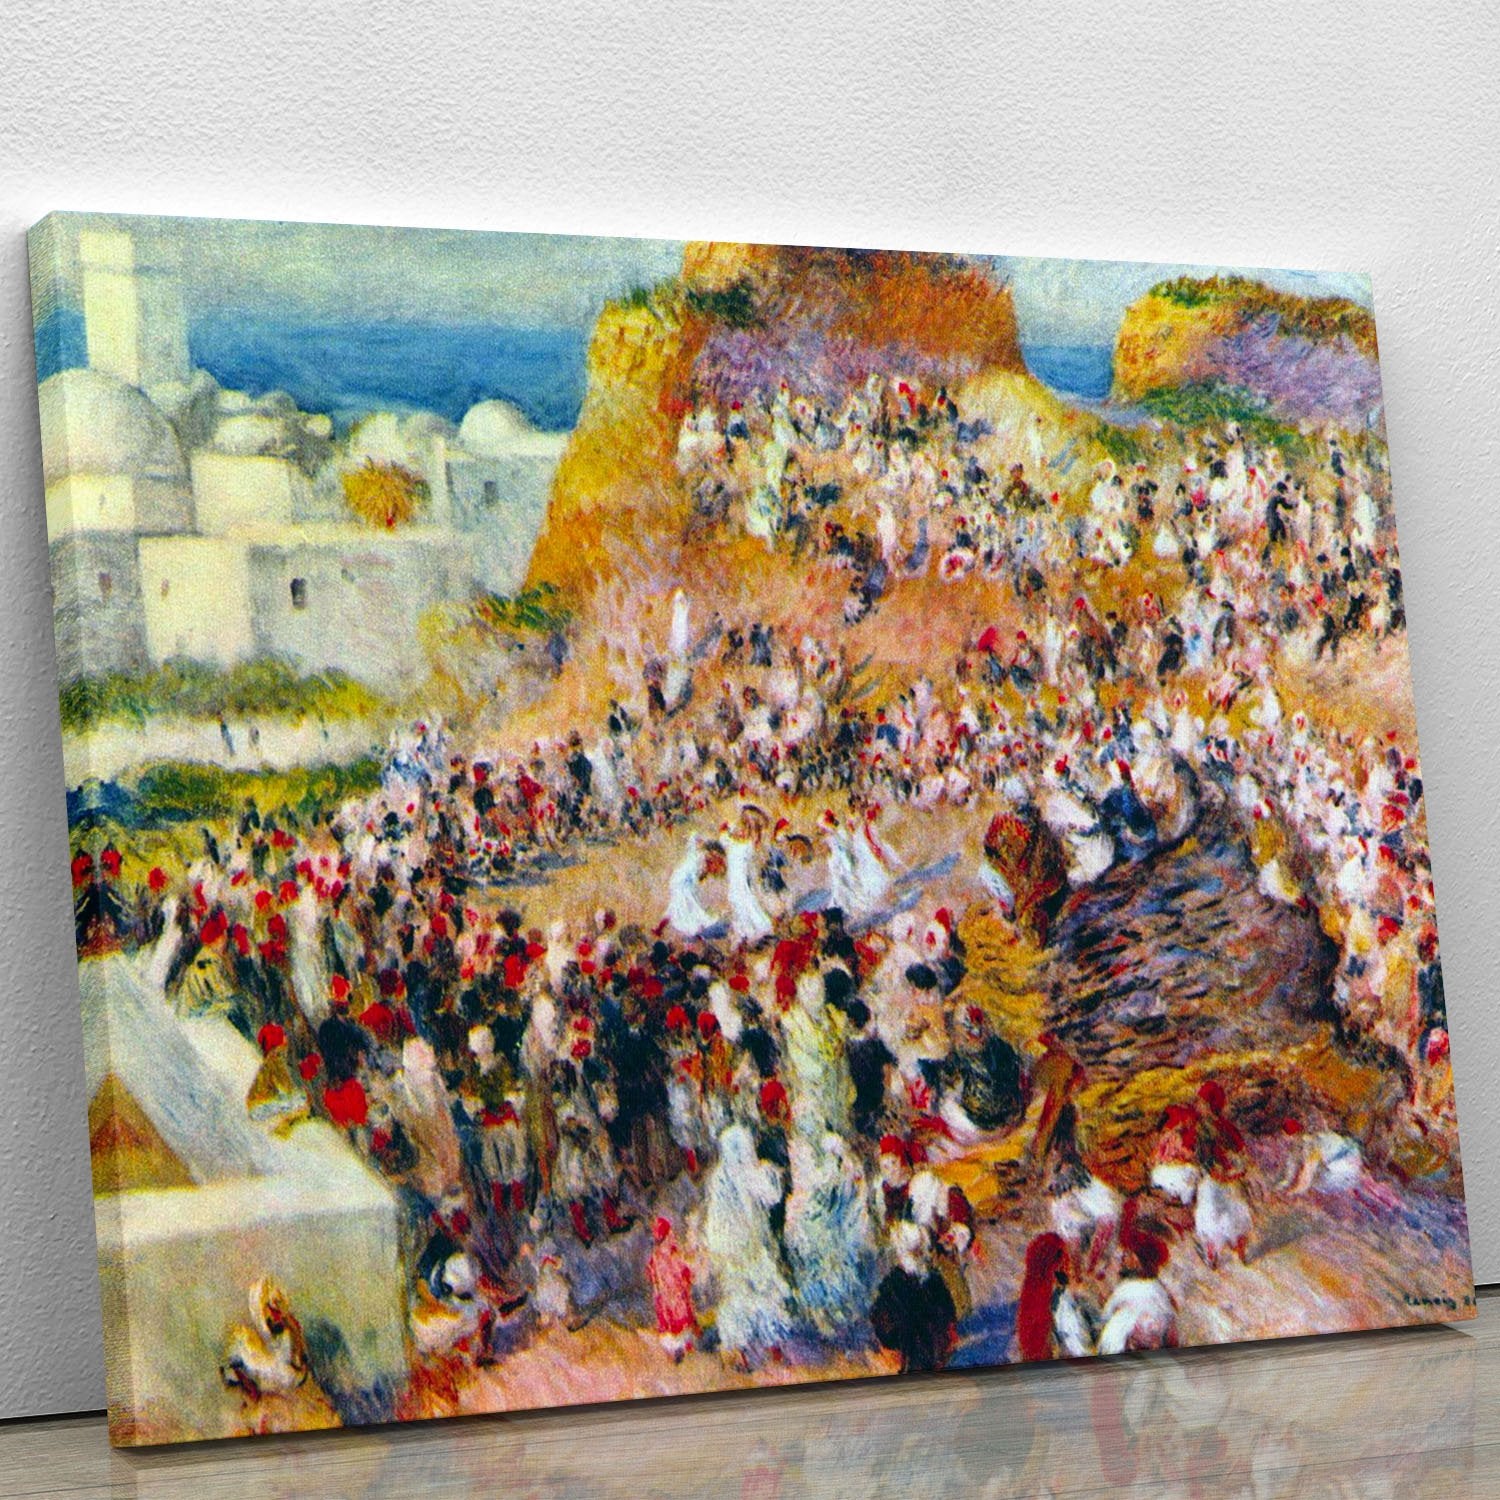 The mosque Arabian Fest by Renoir Canvas Print or Poster